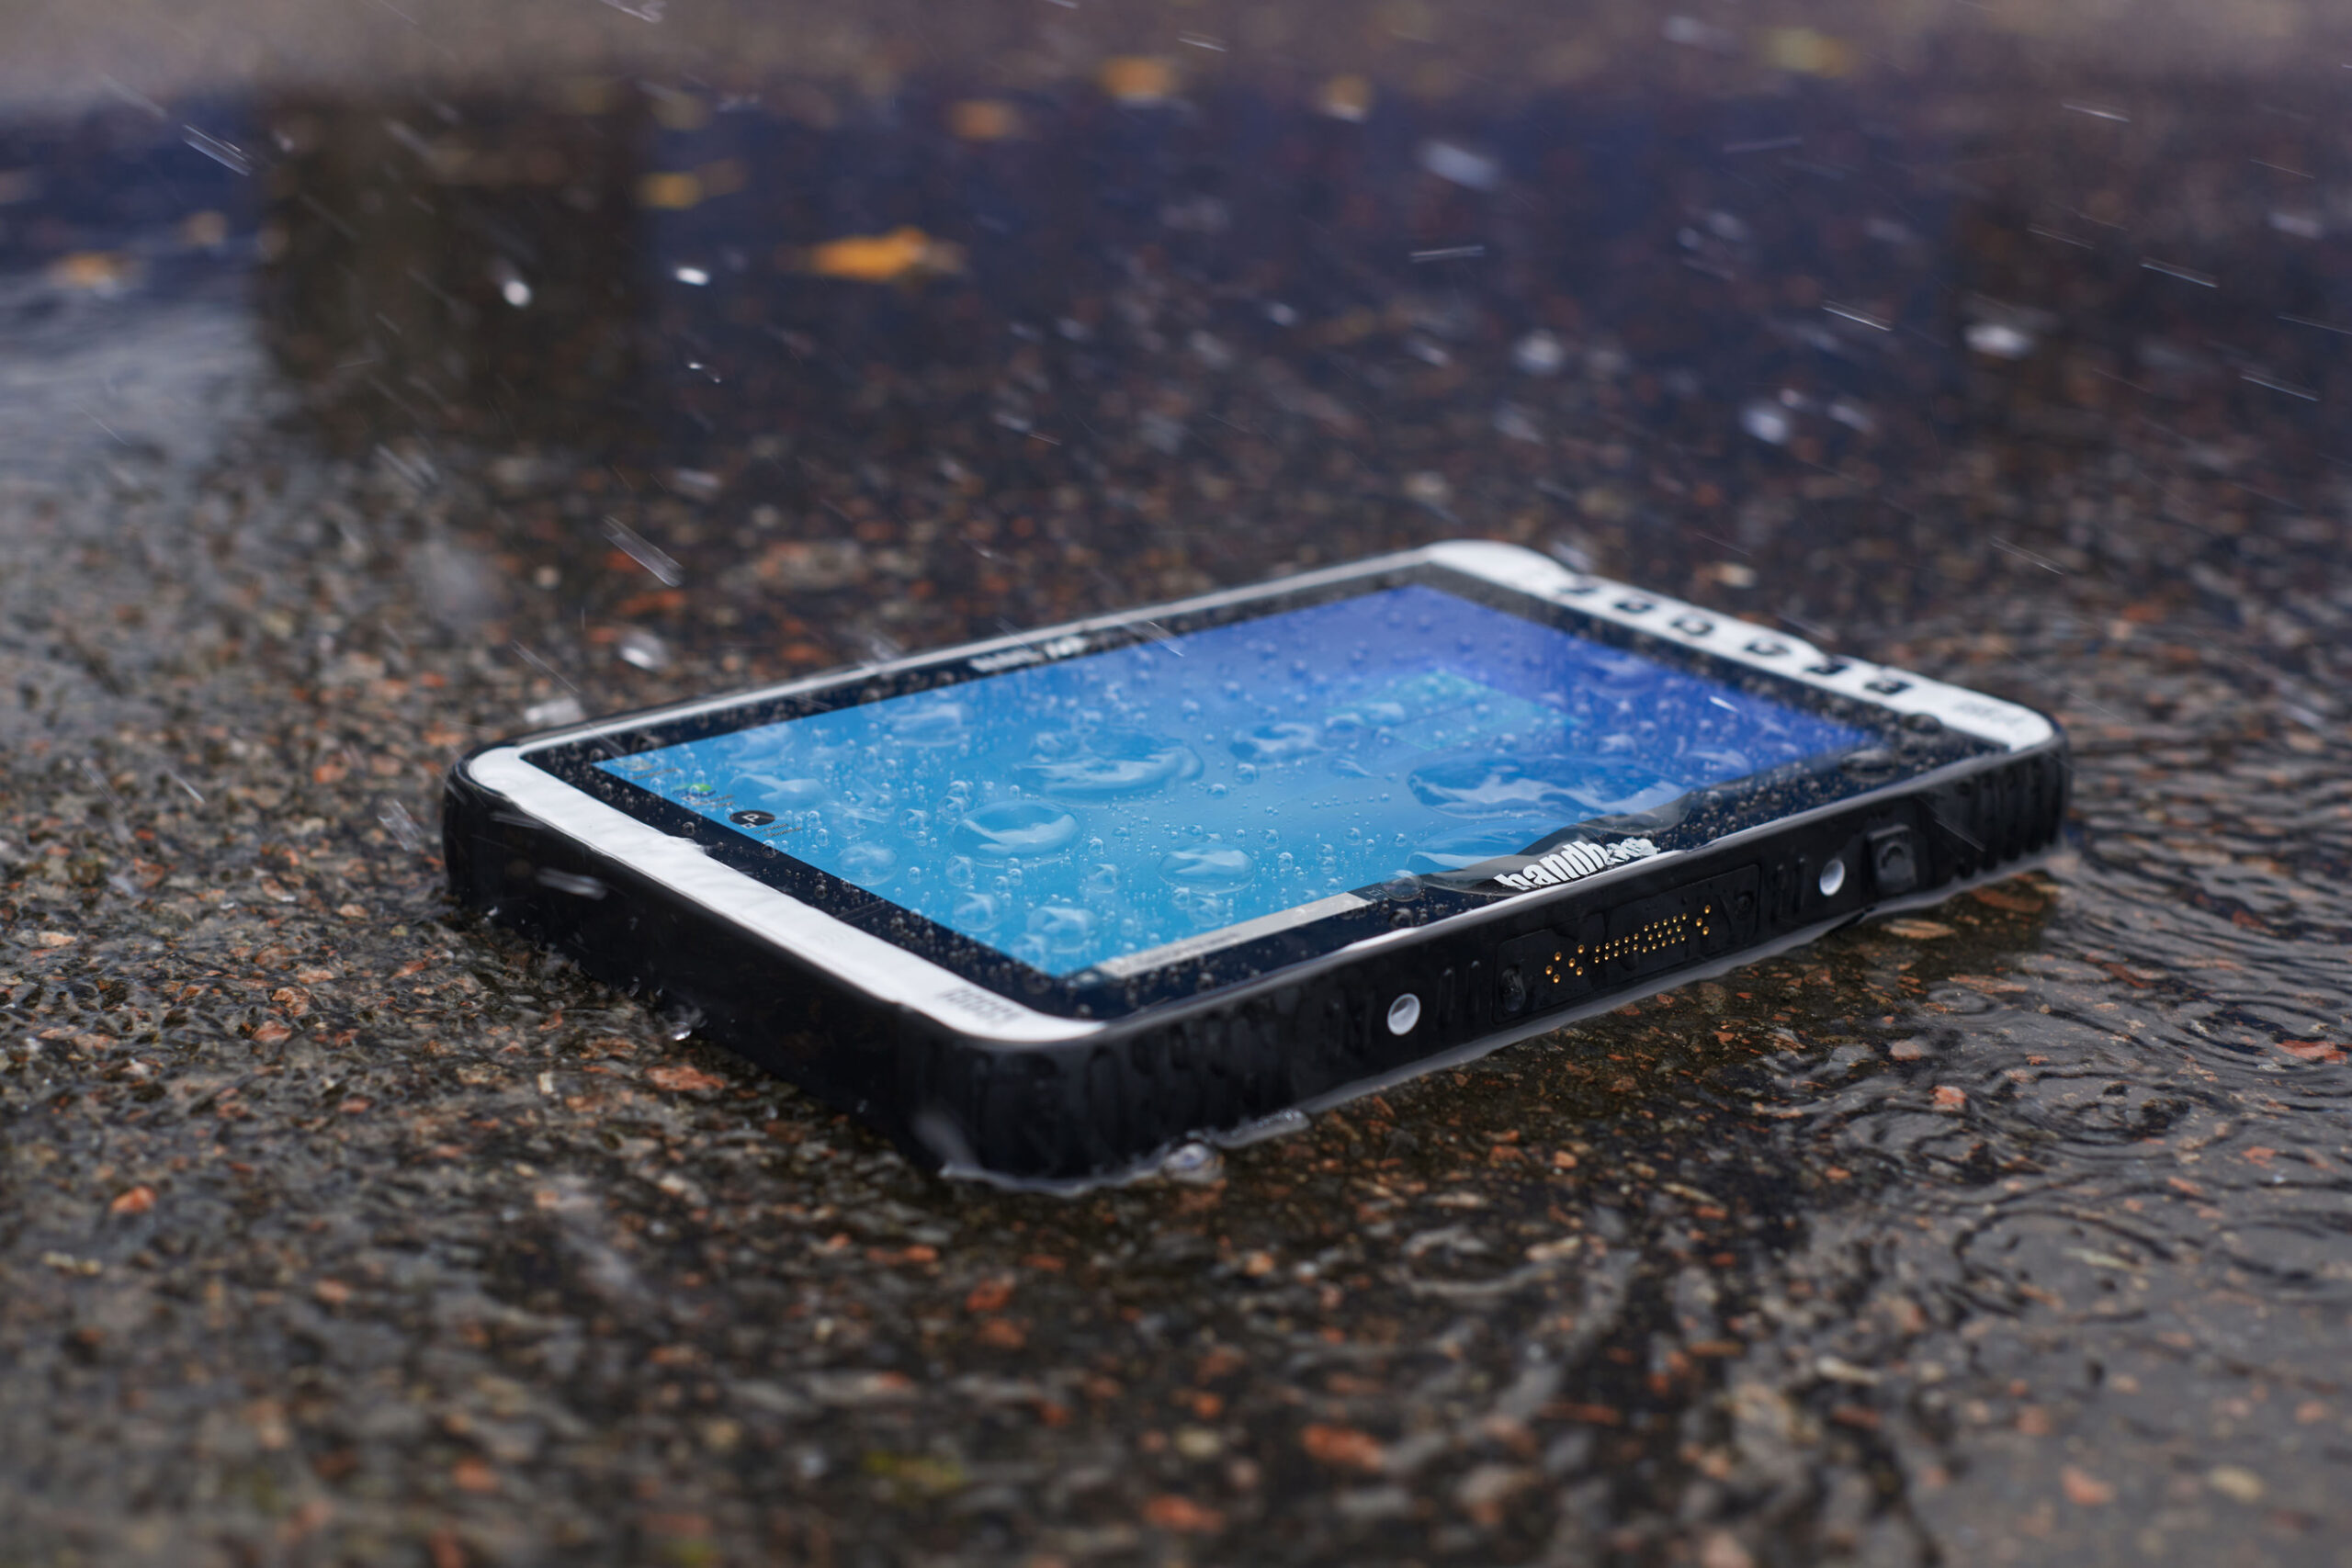 Algiz 10XR rugged Windows tablet on the floor with rain pouring on it